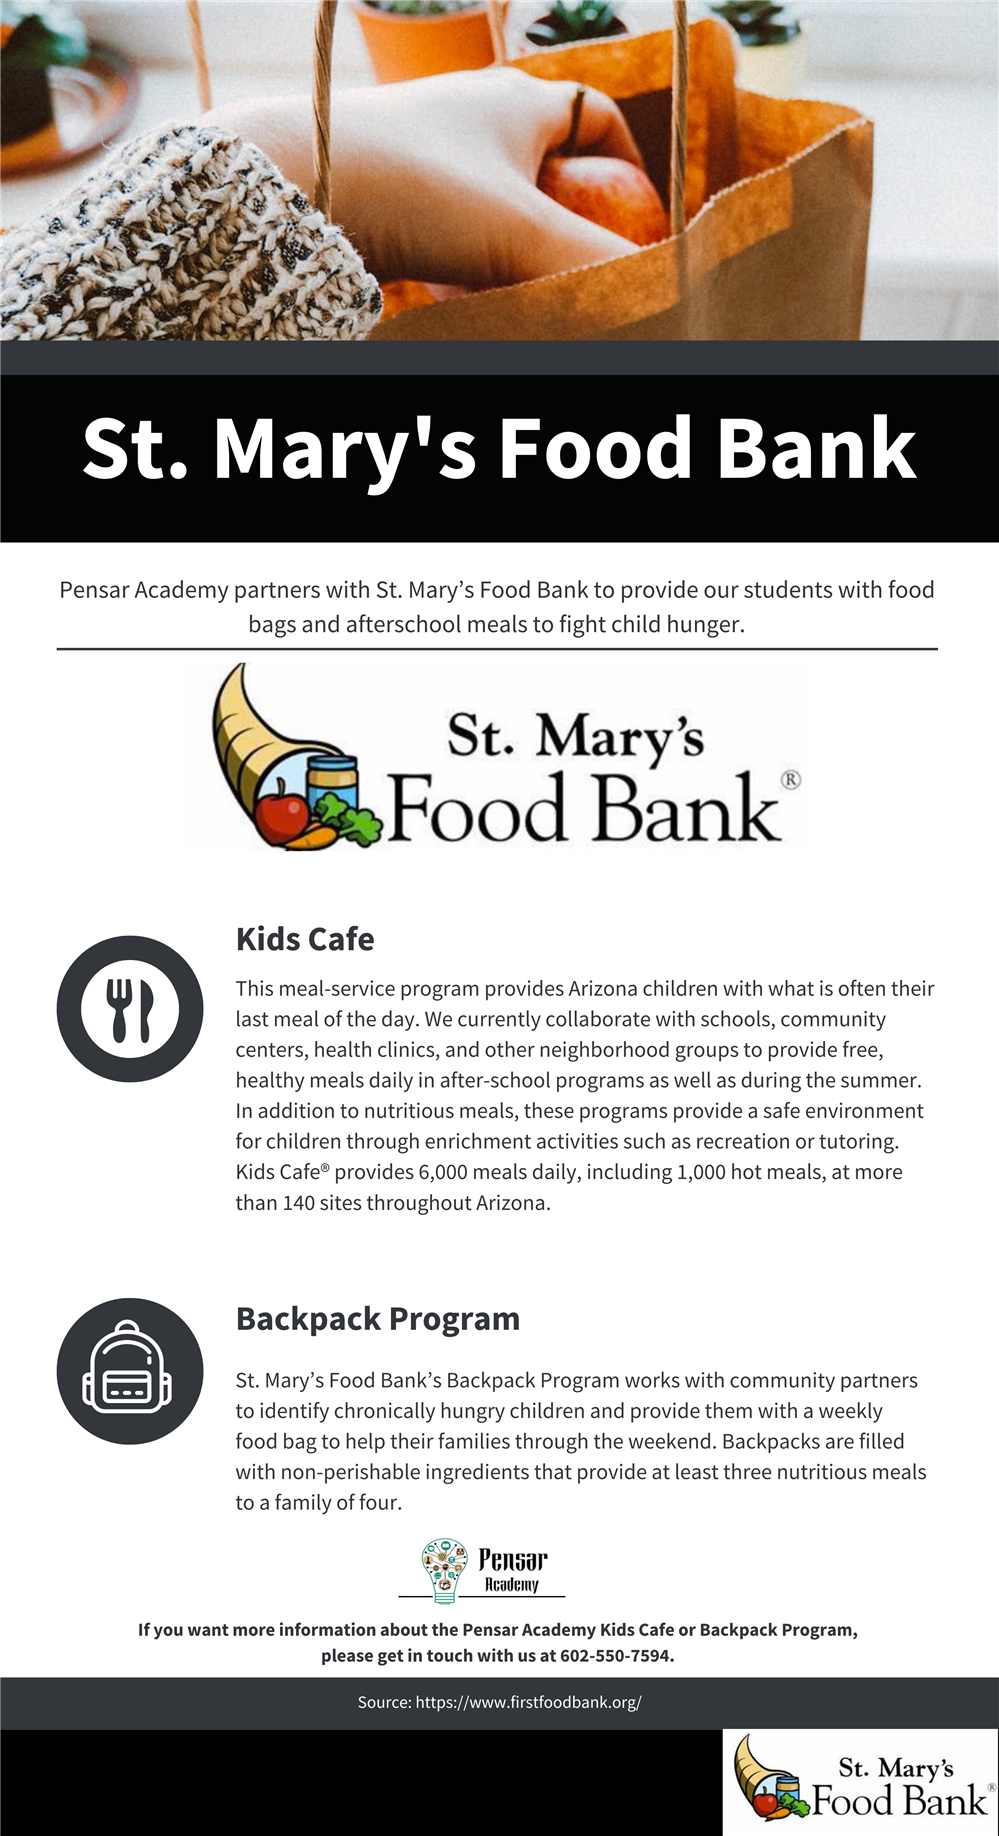 St. Mary's Food Bank Info